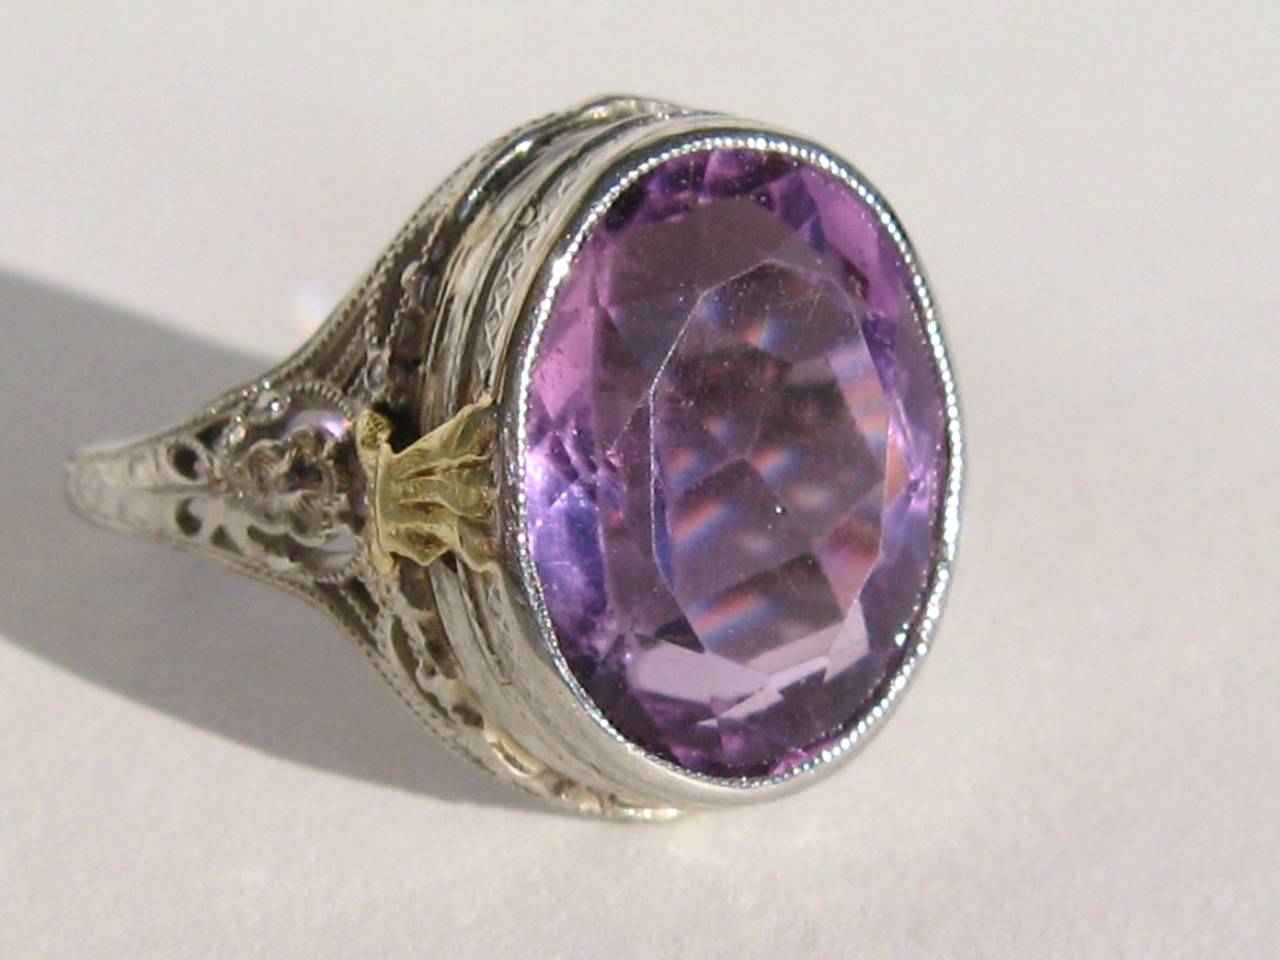 Stunning 14K Gold Filigree Amethyst 1920s Ring. Floral open work on both sides of the large amethyst stone. Stone measures 9.45 x 4.70 x 7.71 = 1.85 Carats. The ring is a size 6.75 and can be sized by us or your jeweler if needed. This is out of a